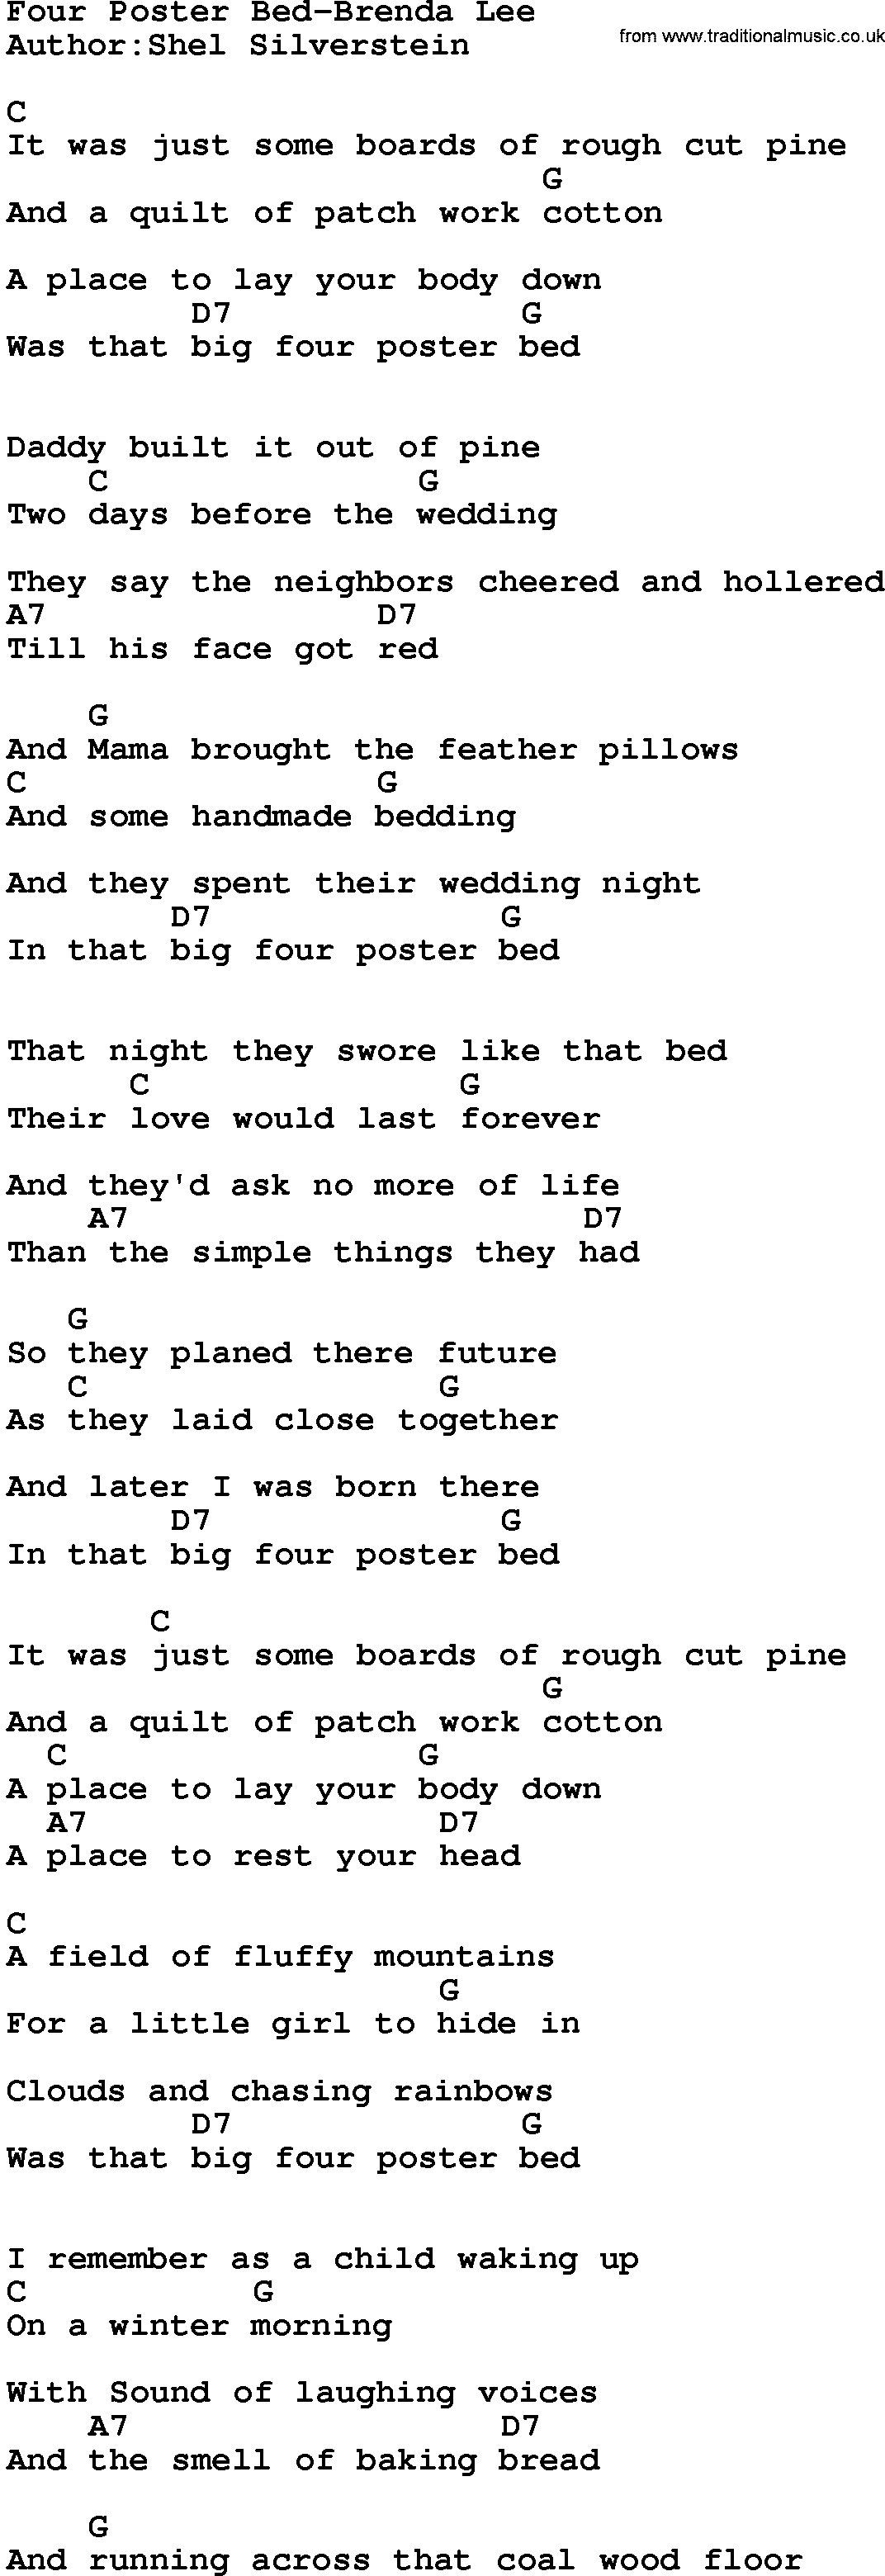 Country music song: Four Poster Bed-Brenda Lee lyrics and chords